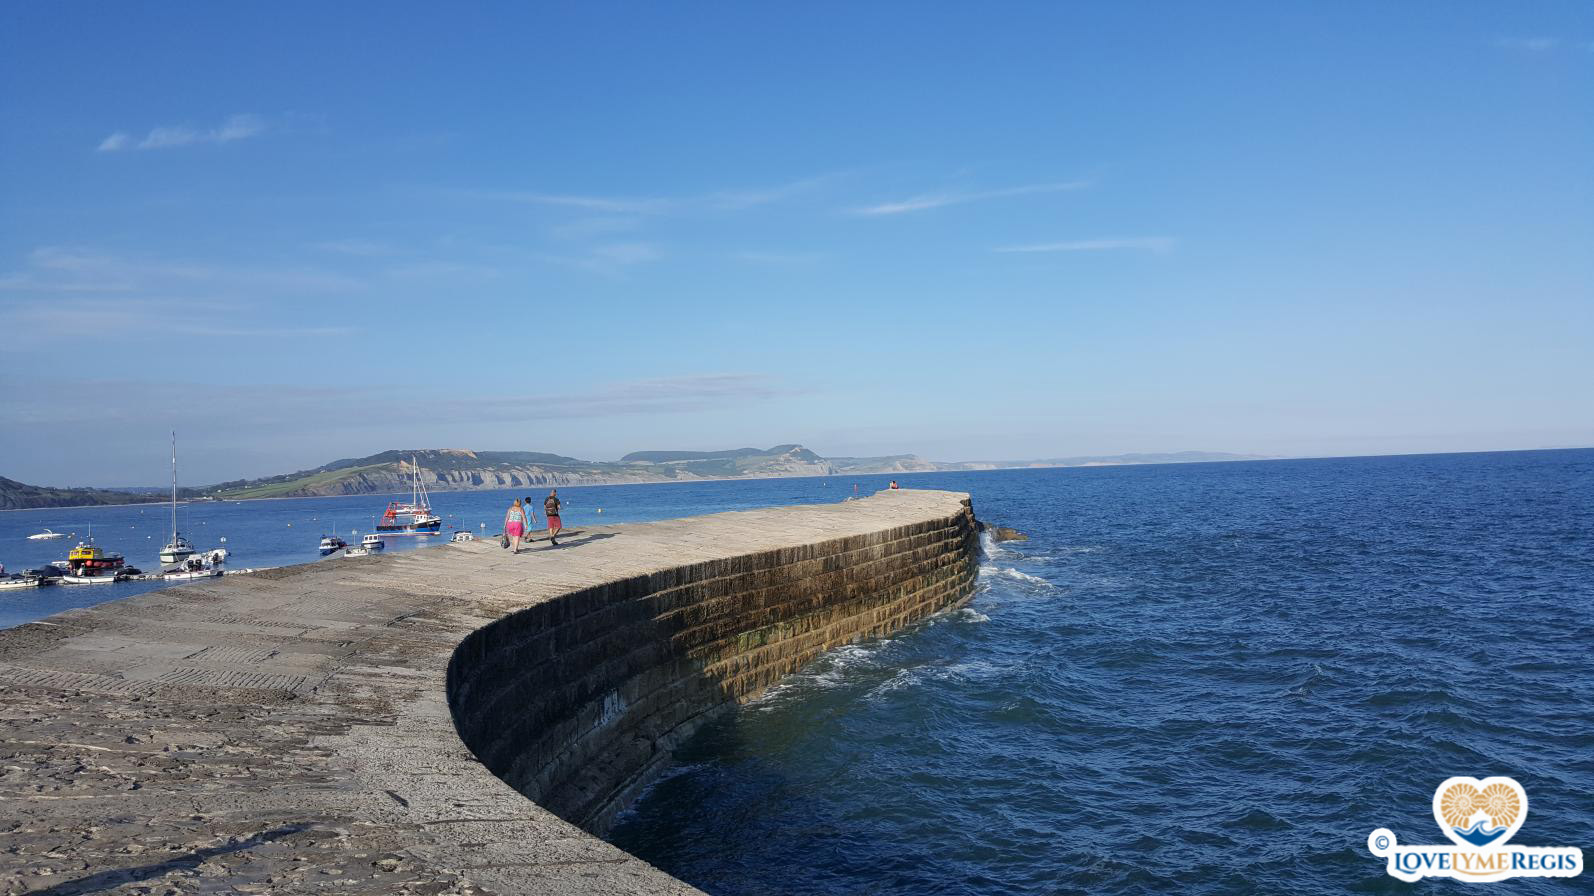 End of the Cobb